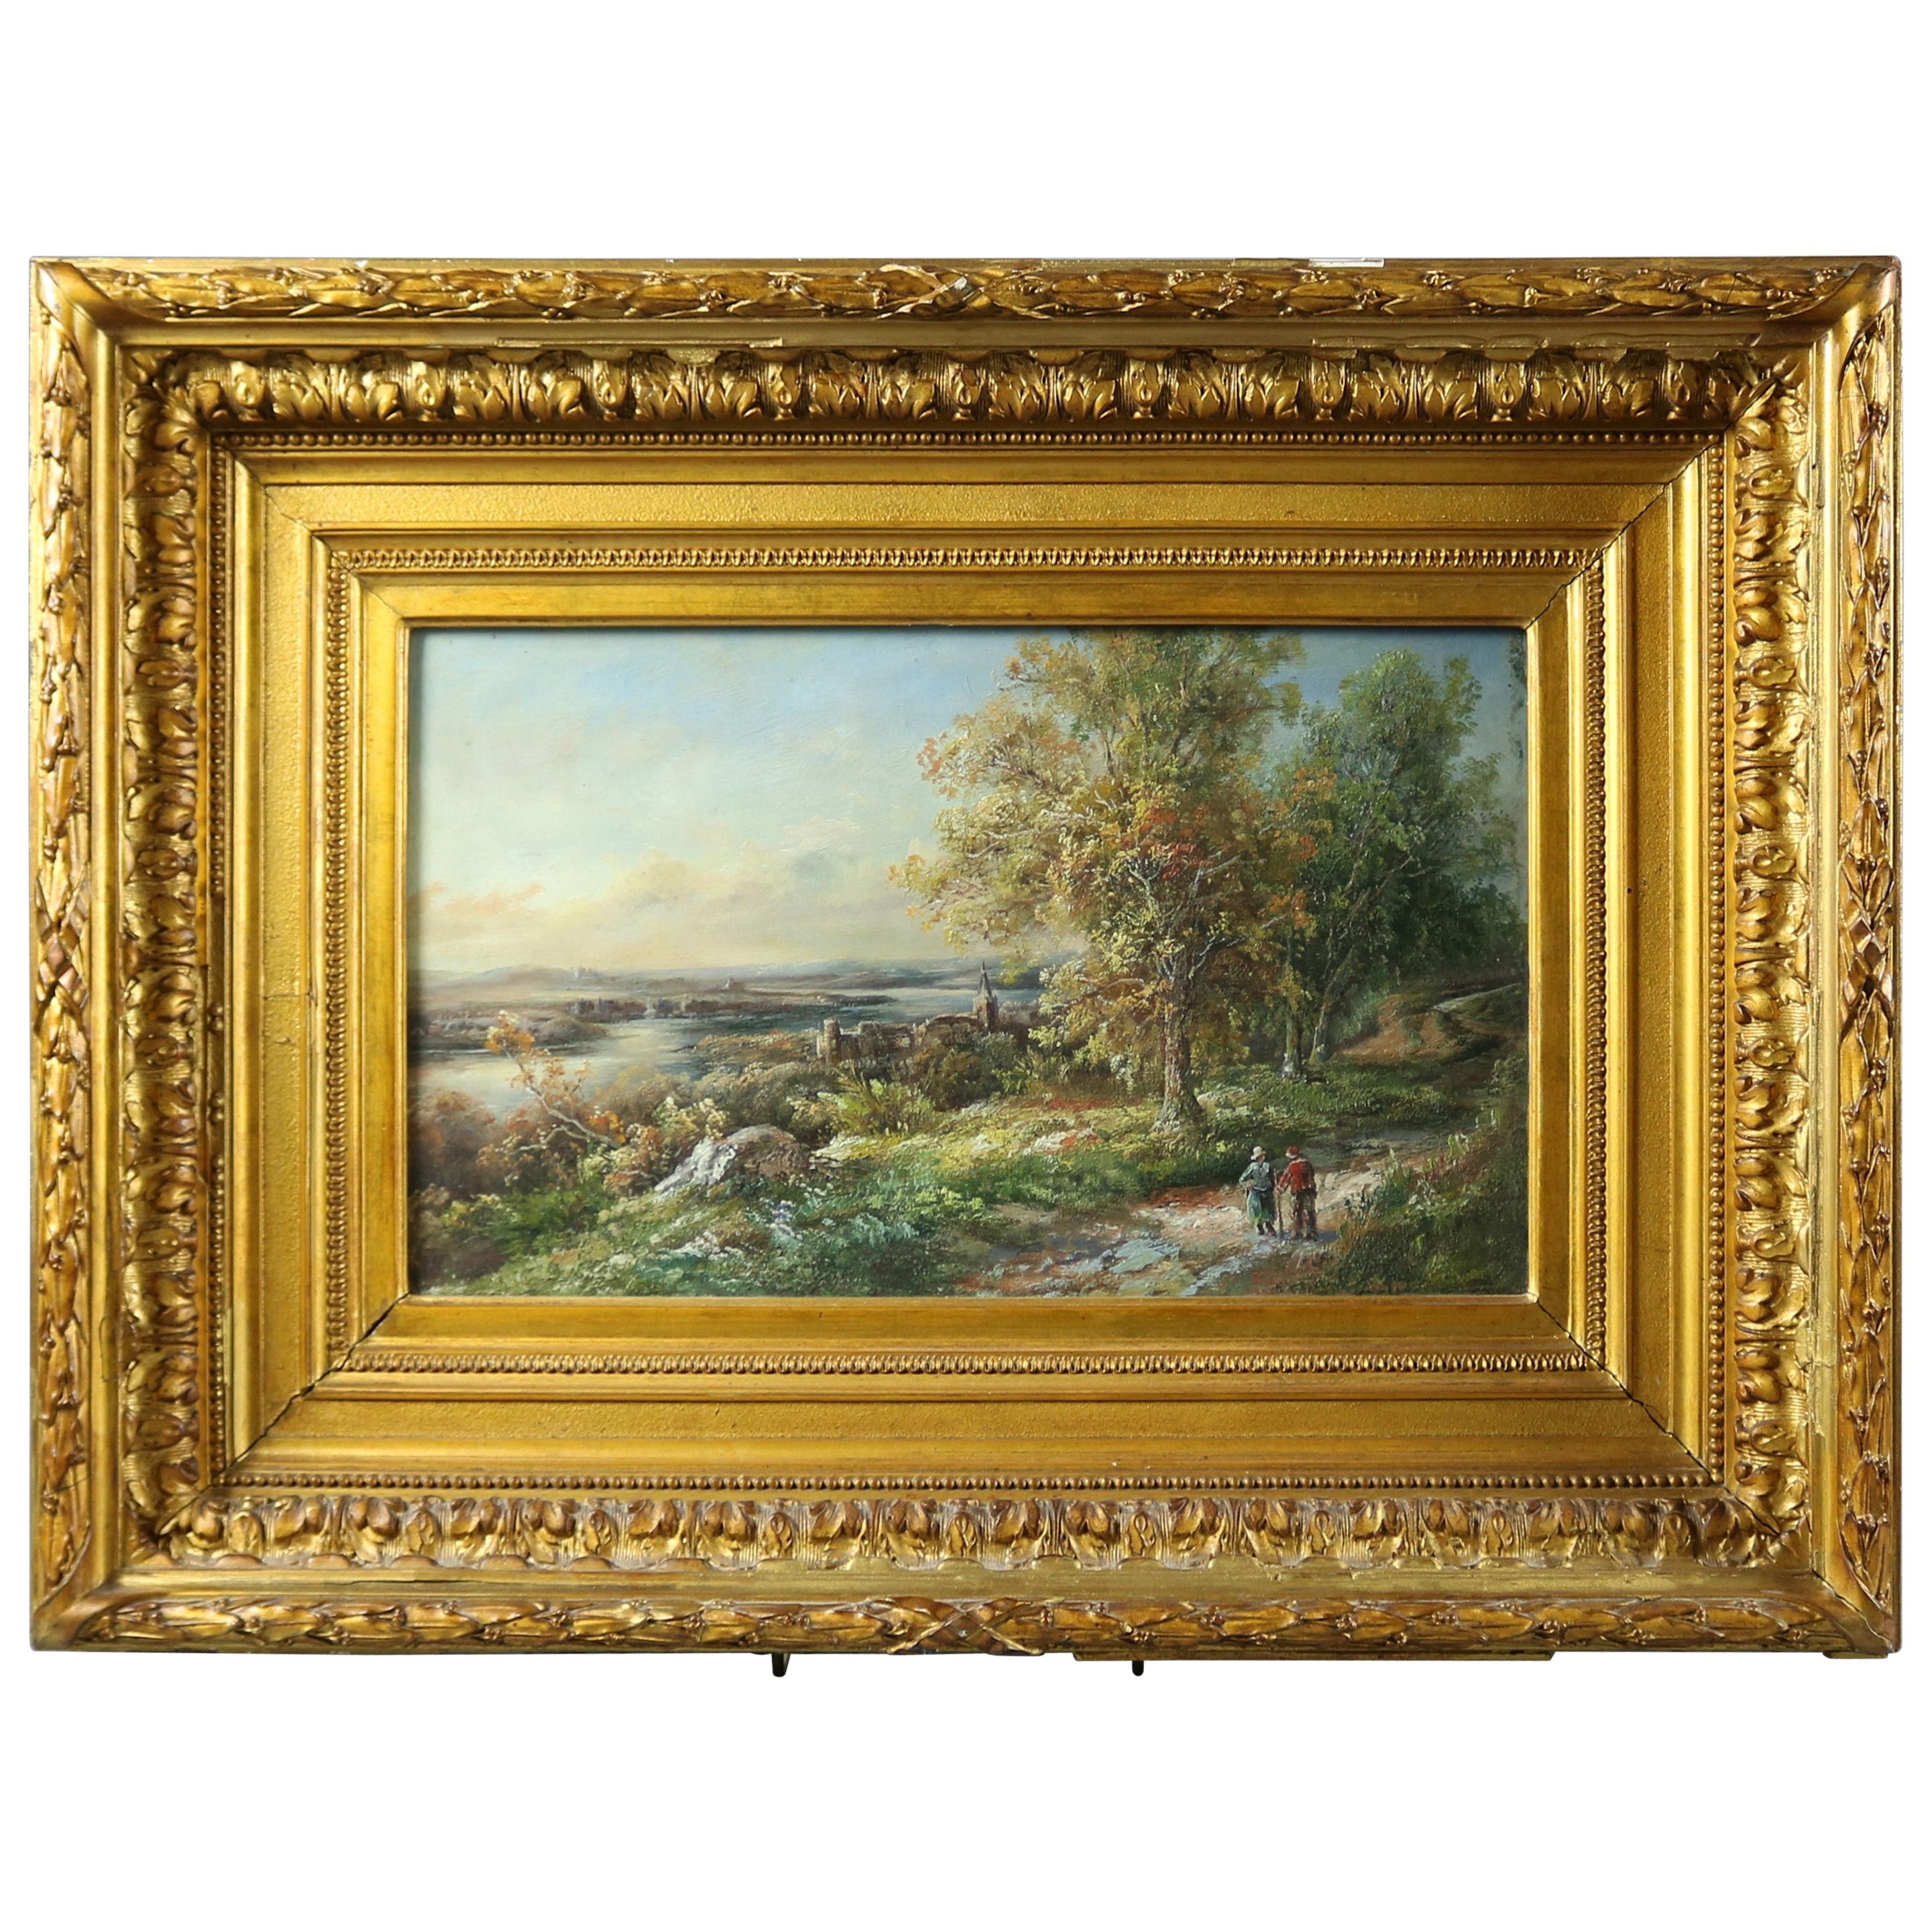 Antique English Landscape Watercolor Painting in Giltwood Frame, circa 1880